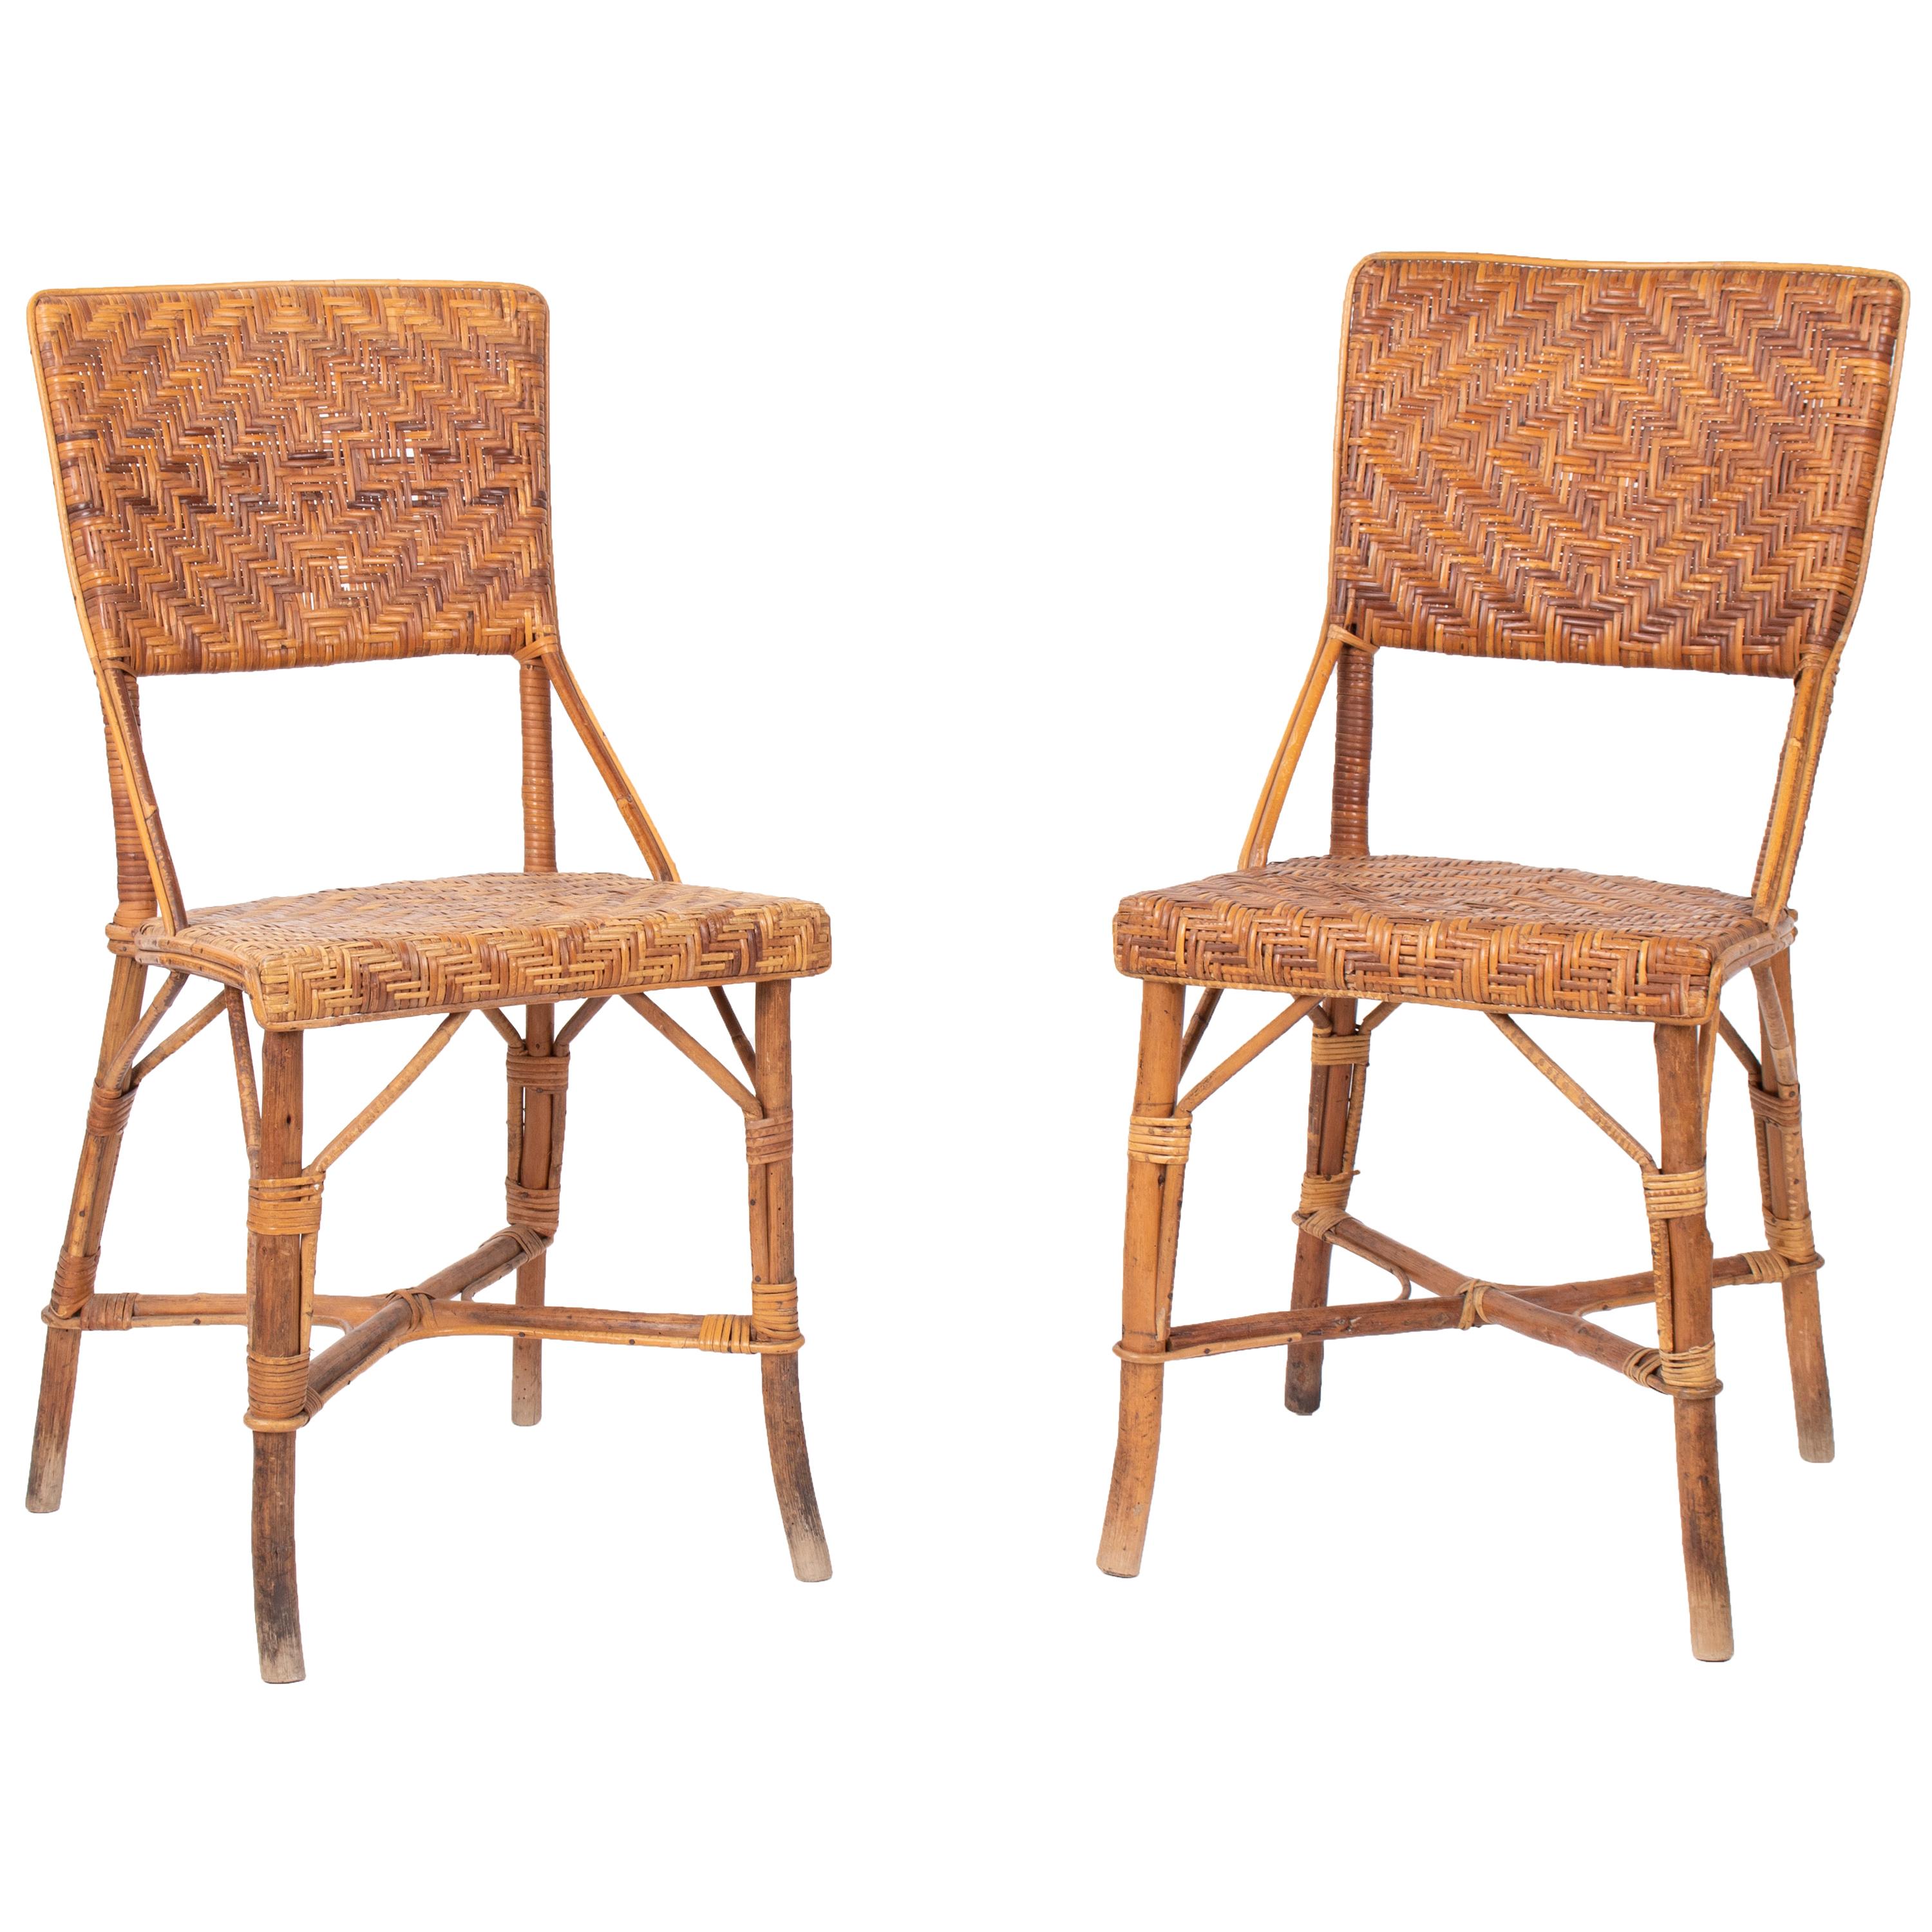 1970s Pair of Spanish Bamboo and Wood Chairs